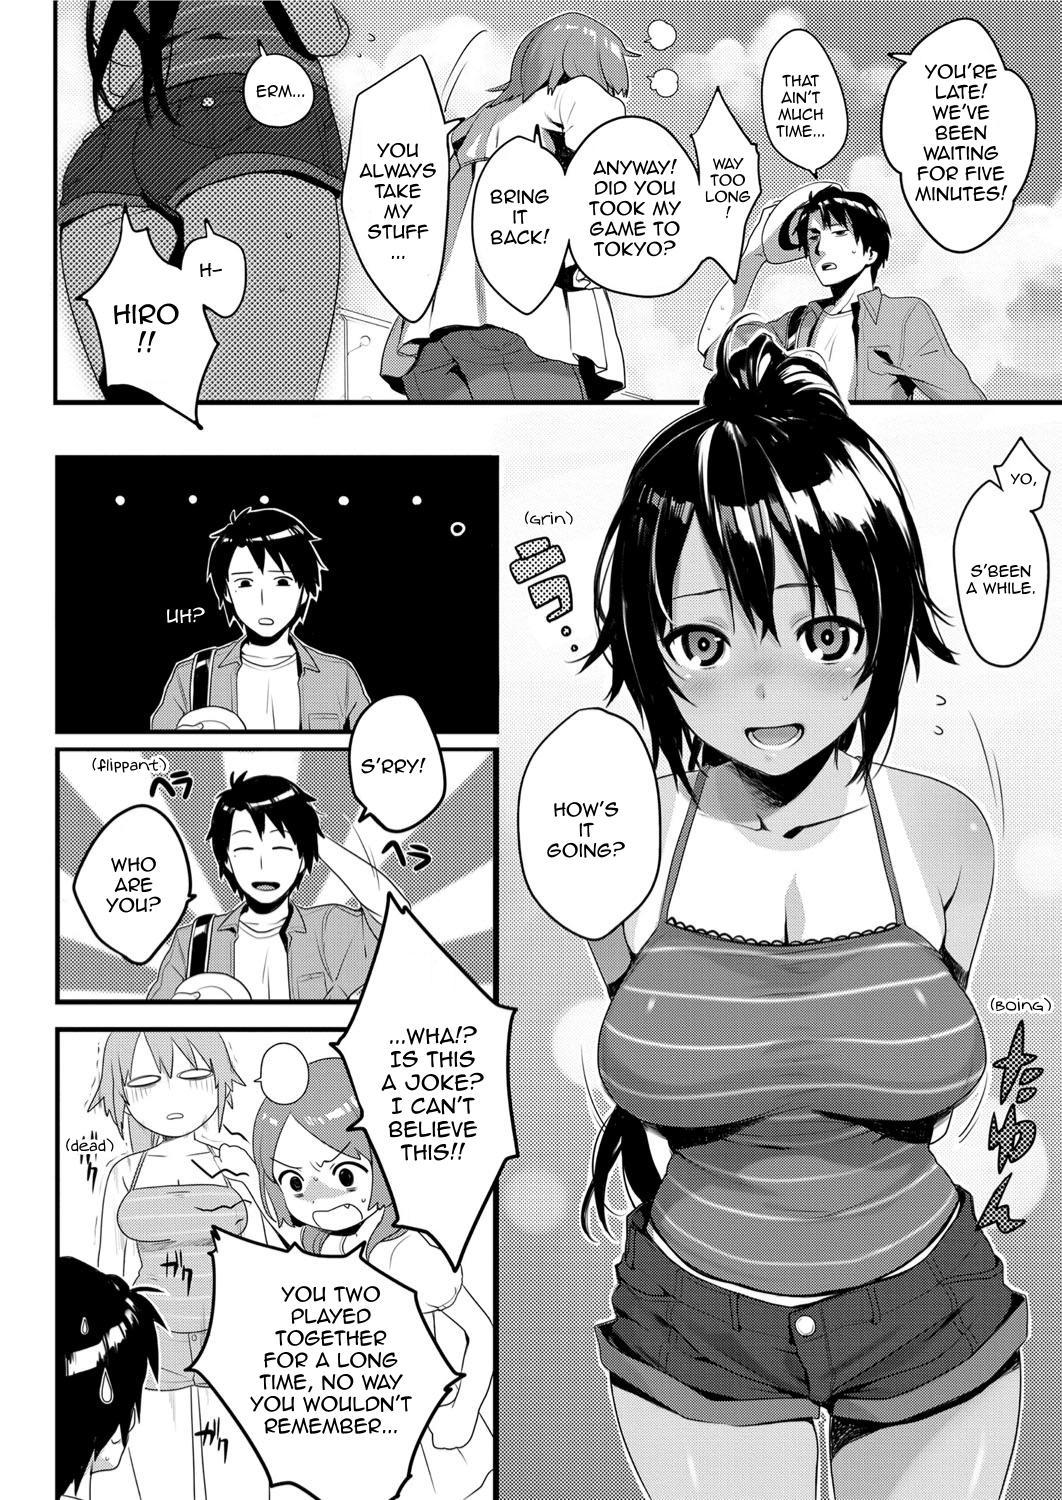 Fat Ass Umi no Mieru Ie | The Place Where I Met Umi Squirting - Page 2